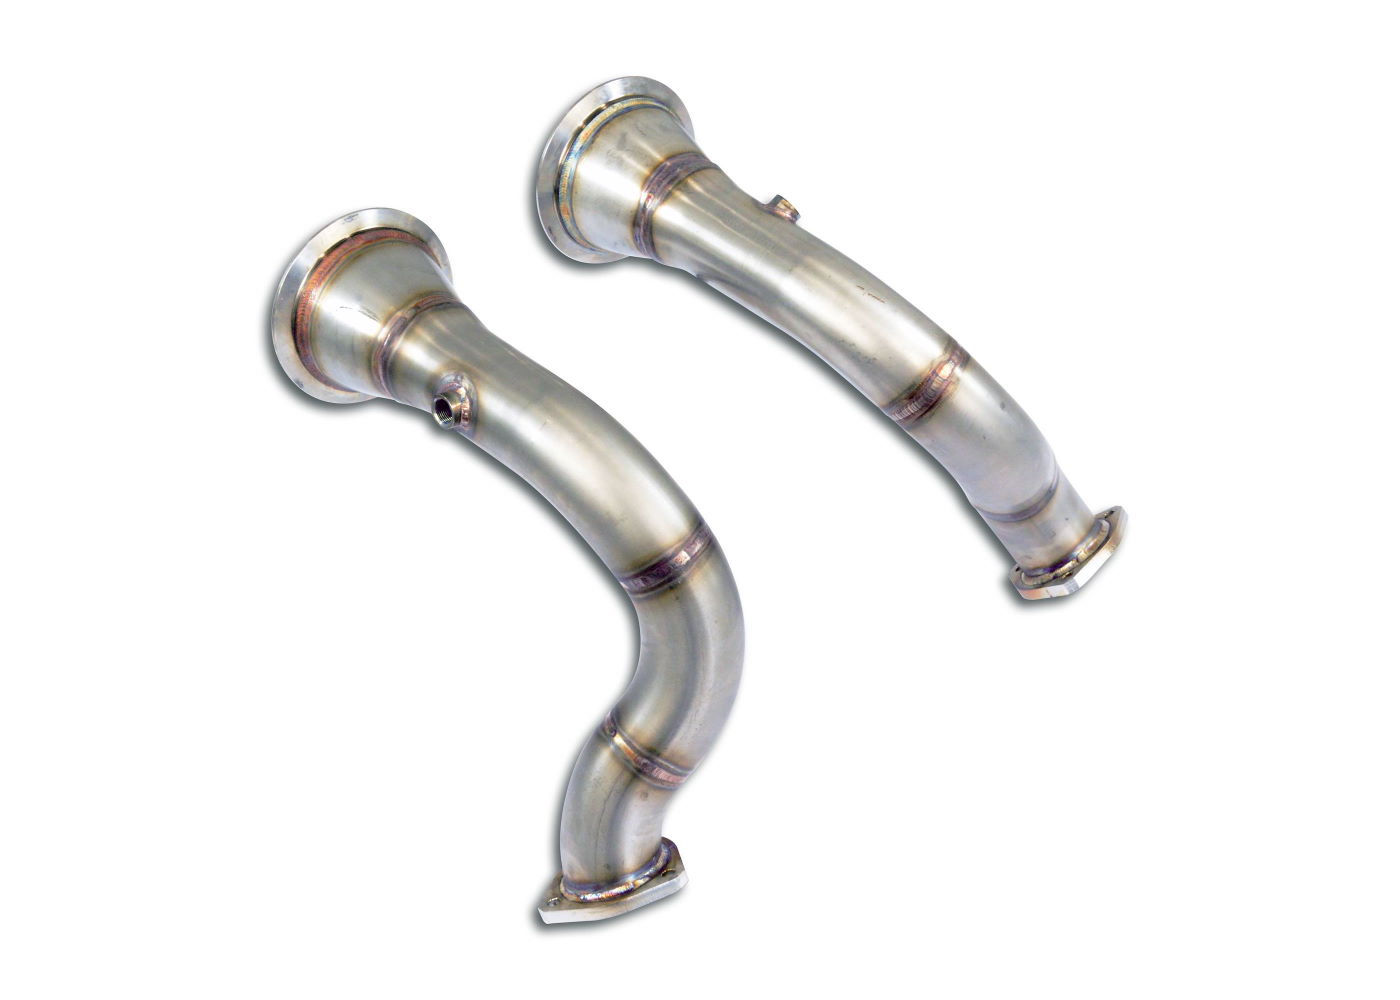 Best Exhaust - Reviews for Supersprint Audi S8 D5 downpipe kit R+L LHD ...